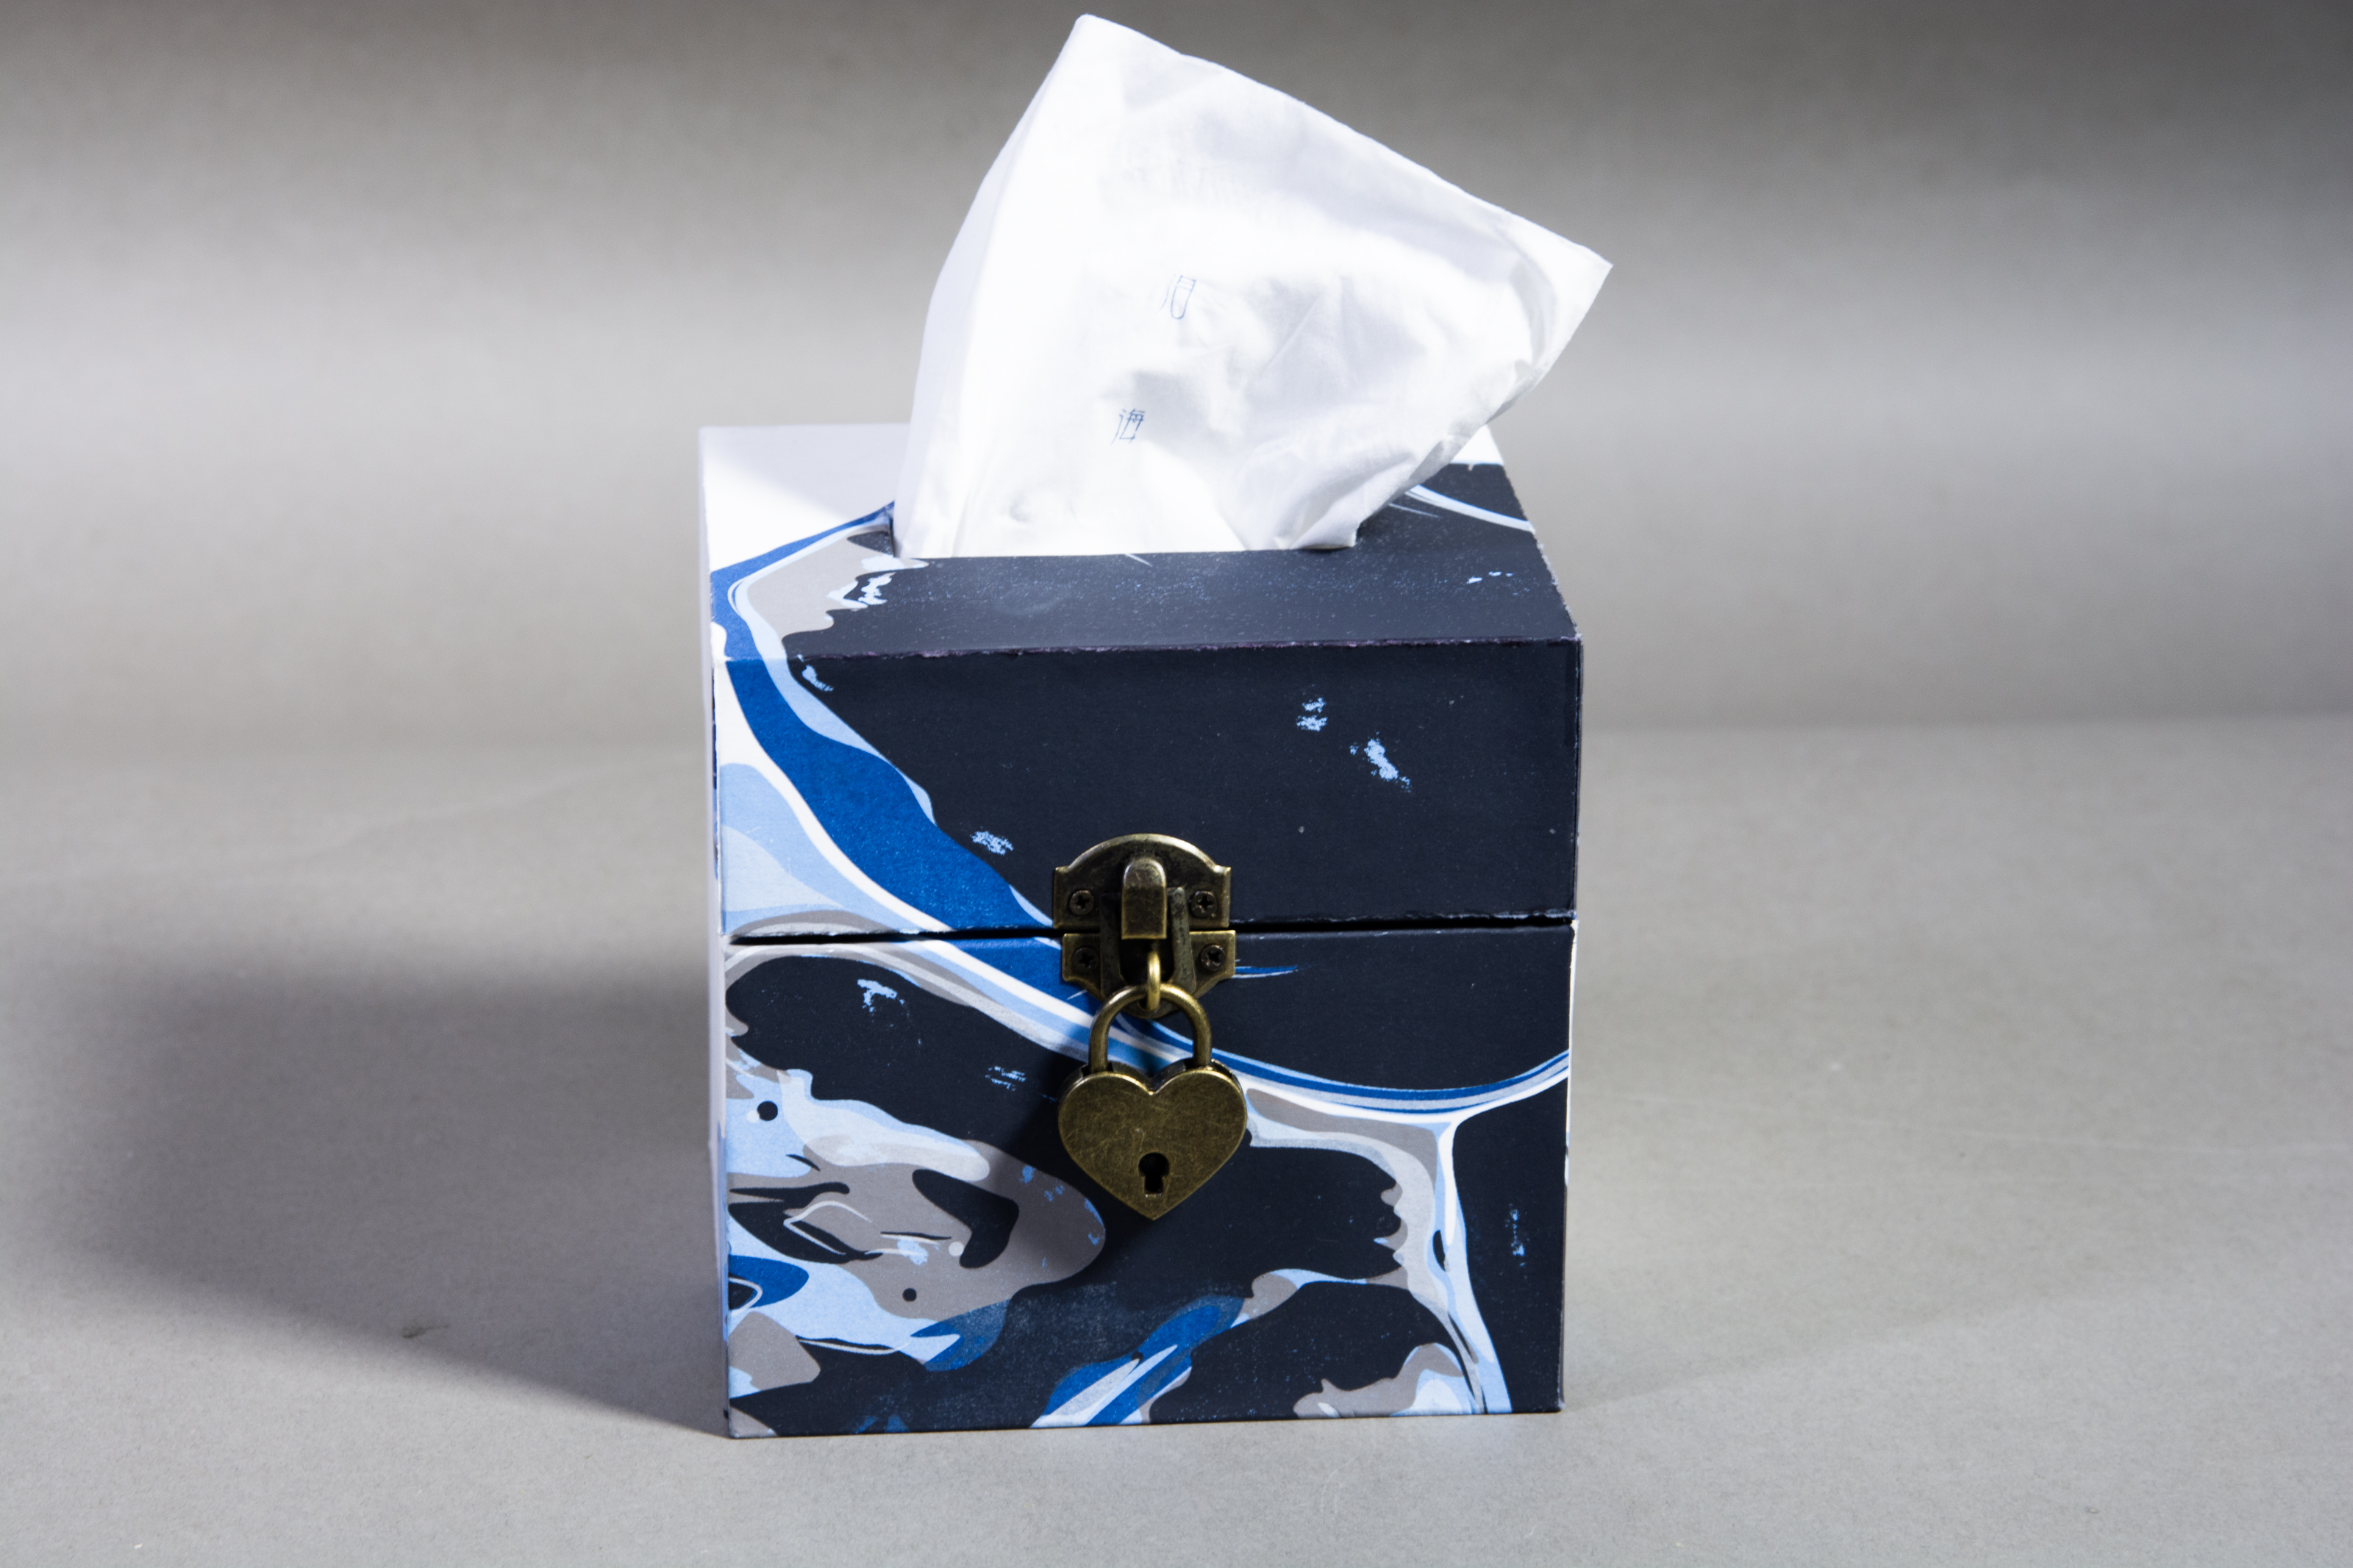 Jingjing Yang's "Sea of Tears," a handmade box painted with blues, greys and whites flowing into each other complete with a brass heart-shaped lock on the front of the box and a tissue coming out of the top